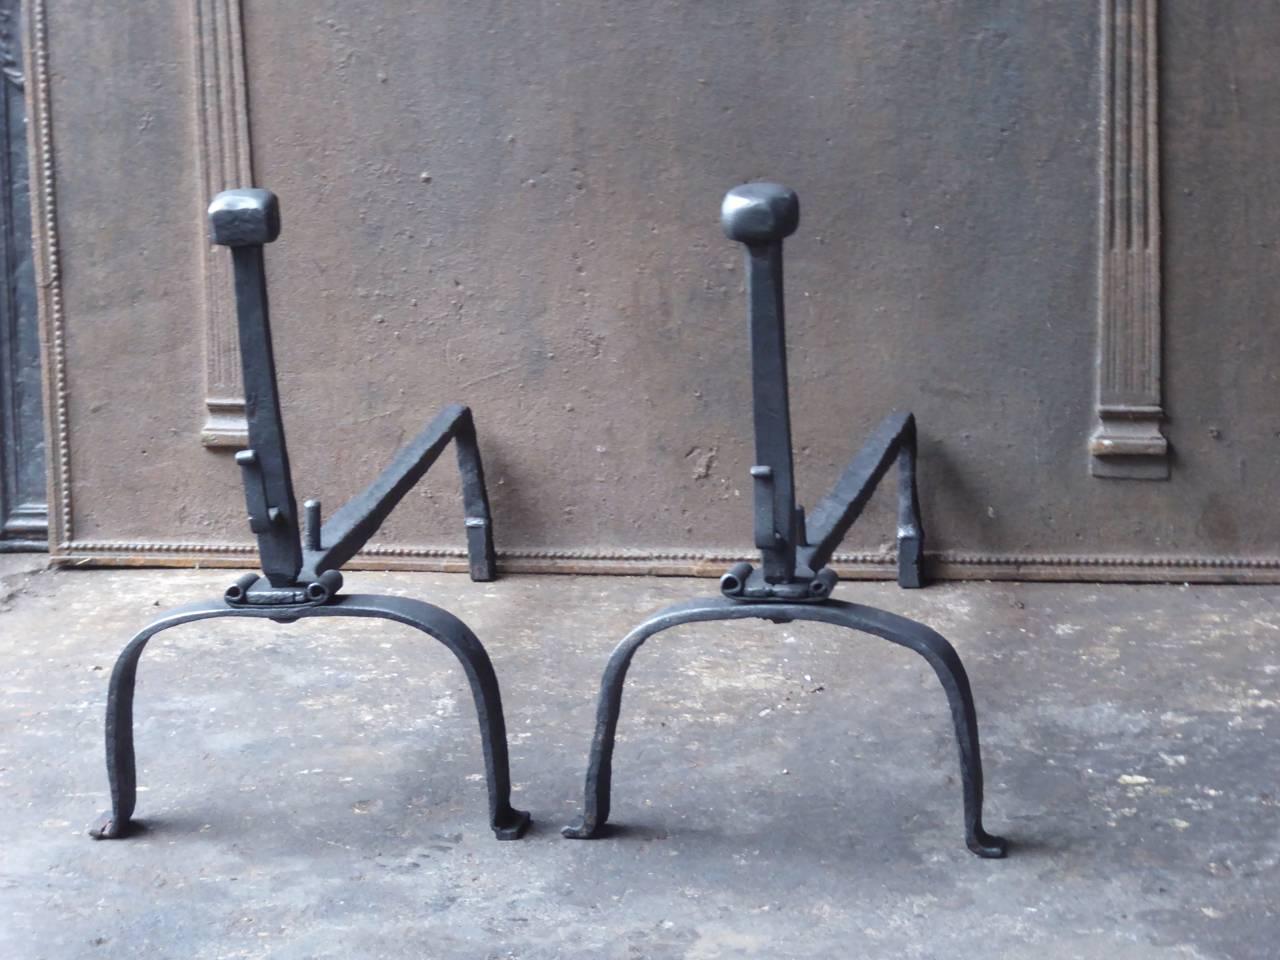 18th century French Gothic fire dogs made of wrought iron.

We have a unique and specialized collection of antique and used fireplace accessories consisting of more than 1000 listings at 1stdibs. Amongst others, we always have 500+ firebacks, 400+